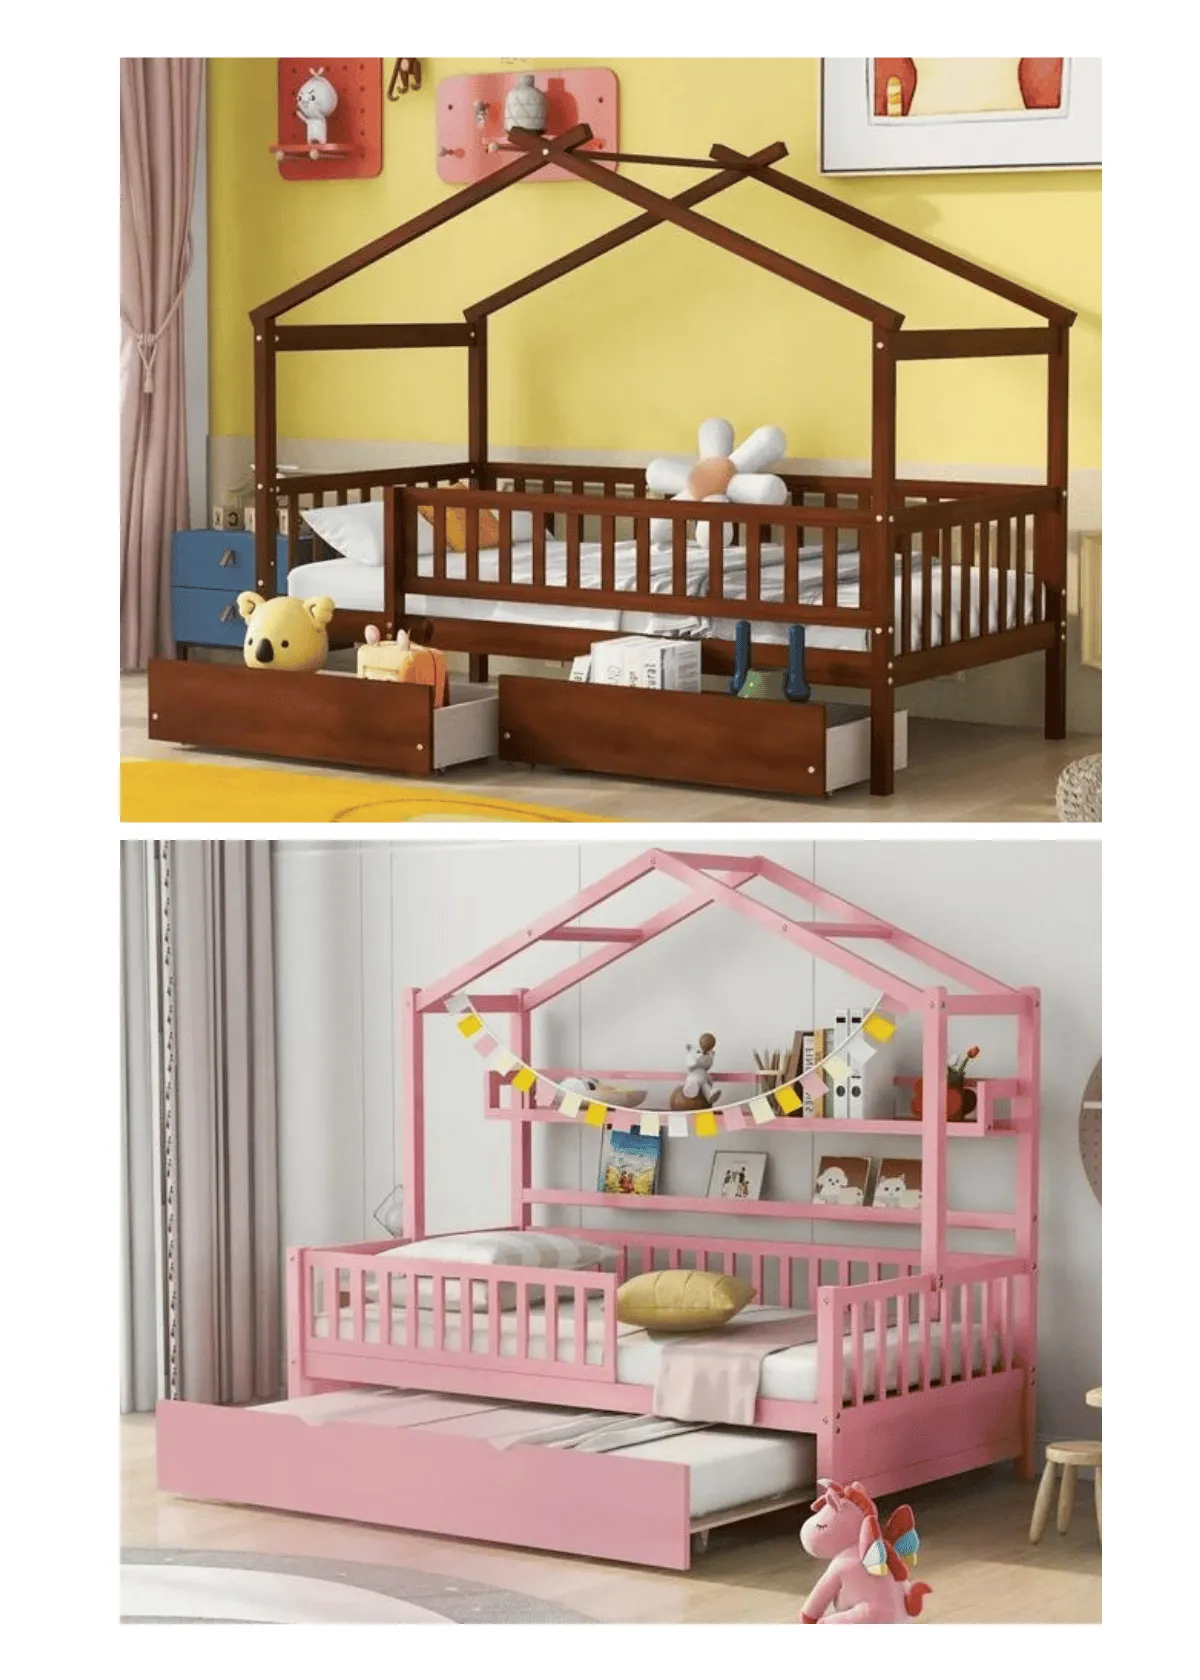 "How to Choose the Perfect House Bed Frame for Your Kids's Room"